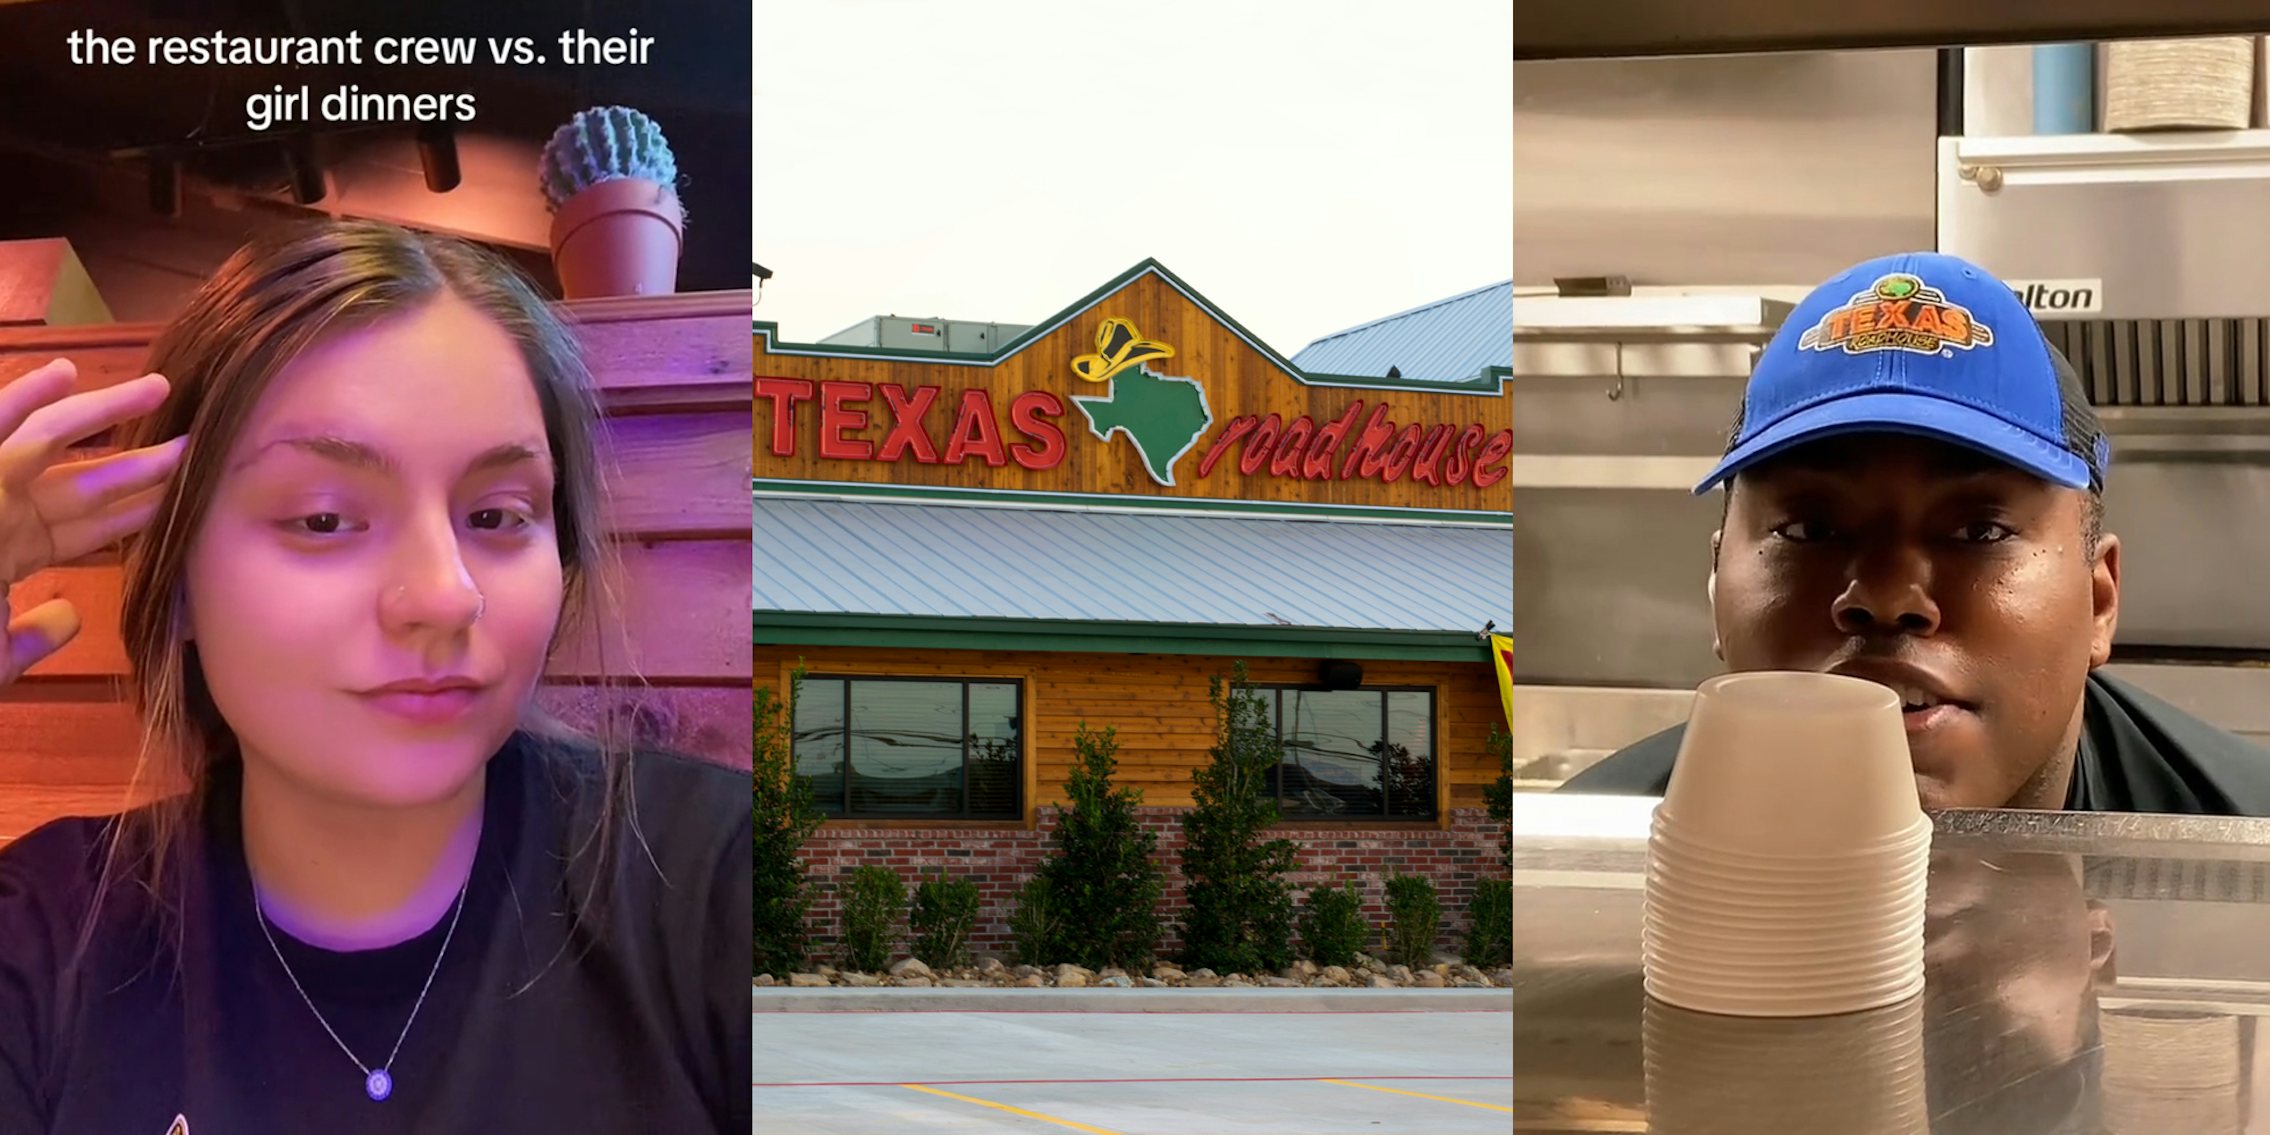 Texas Roadhouse worker with caption 'the restaurant crew vs. their girl dinners' (l) Texas Roadhouse building with sign (c) Texas Roadhouse worker speaking (r)